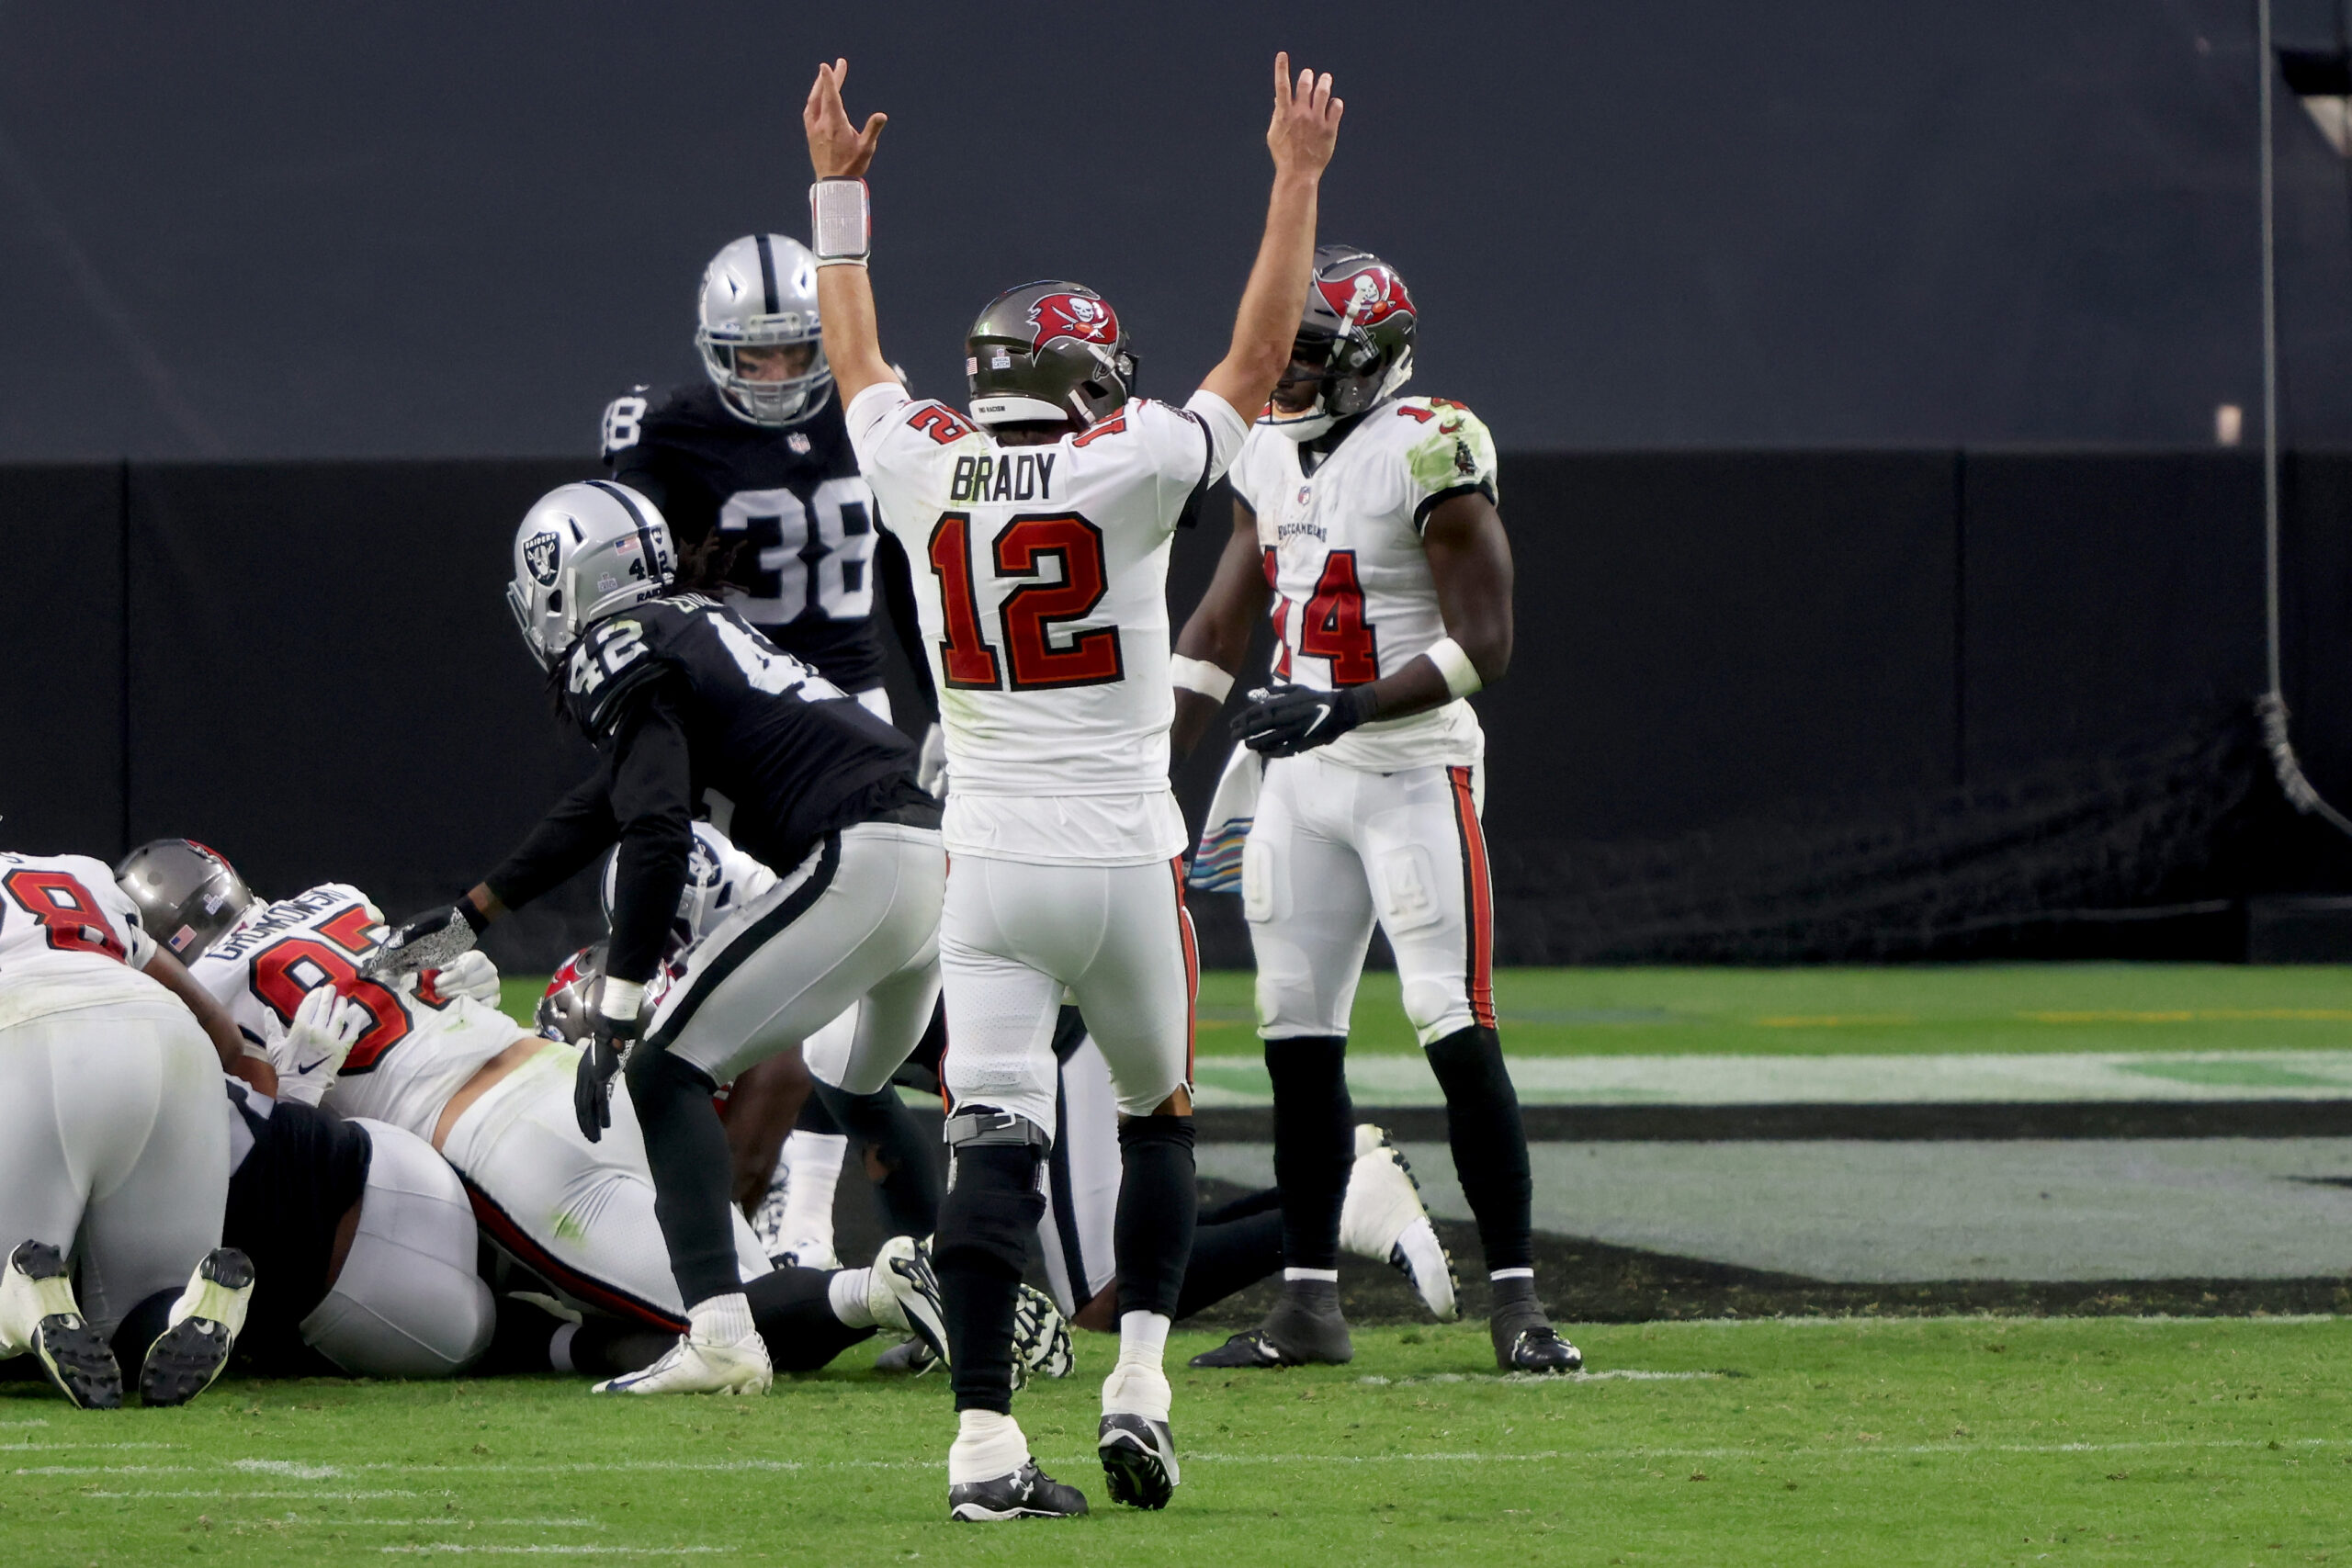 LAS VEGAS, NEVADA - OCTOBER 25: Tom Brady #12 of the Tampa Bay Buccaneers celebrates after scoring a touchdown in the fourth quarter against the Las Vegas Raiders at Allegiant Stadium on October 25, 2020 in Las Vegas, Nevada. (Photo by Jamie Squire/Getty Images)